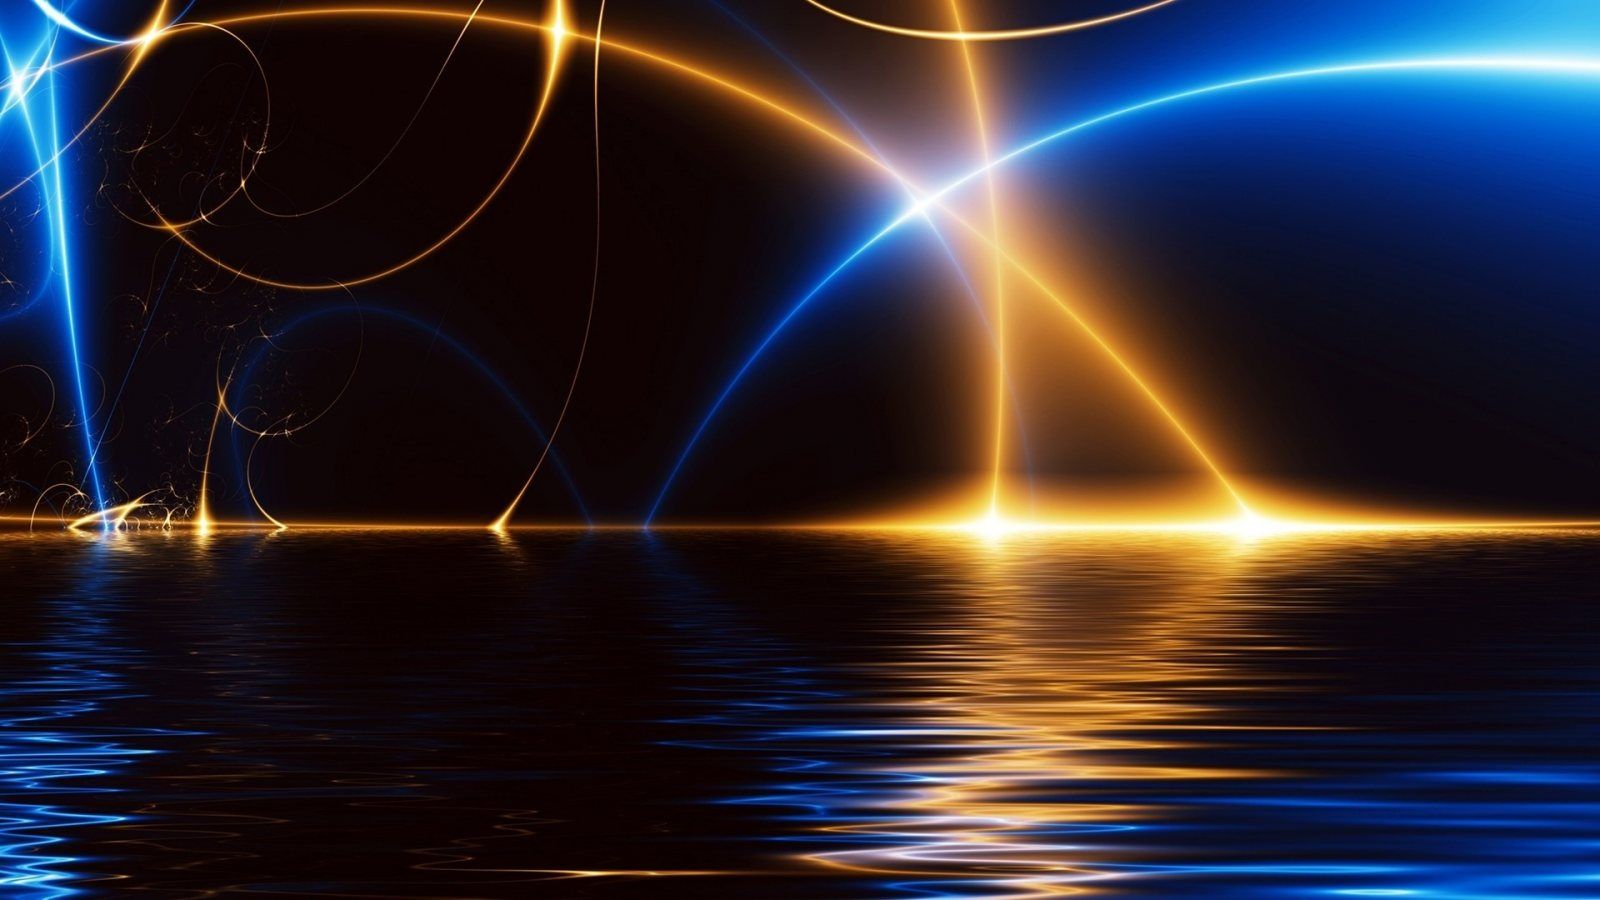 Abstract Background X Super Hd And Stock 151449 Wallpaper - Reflection Of Light Hd - HD Wallpaper 